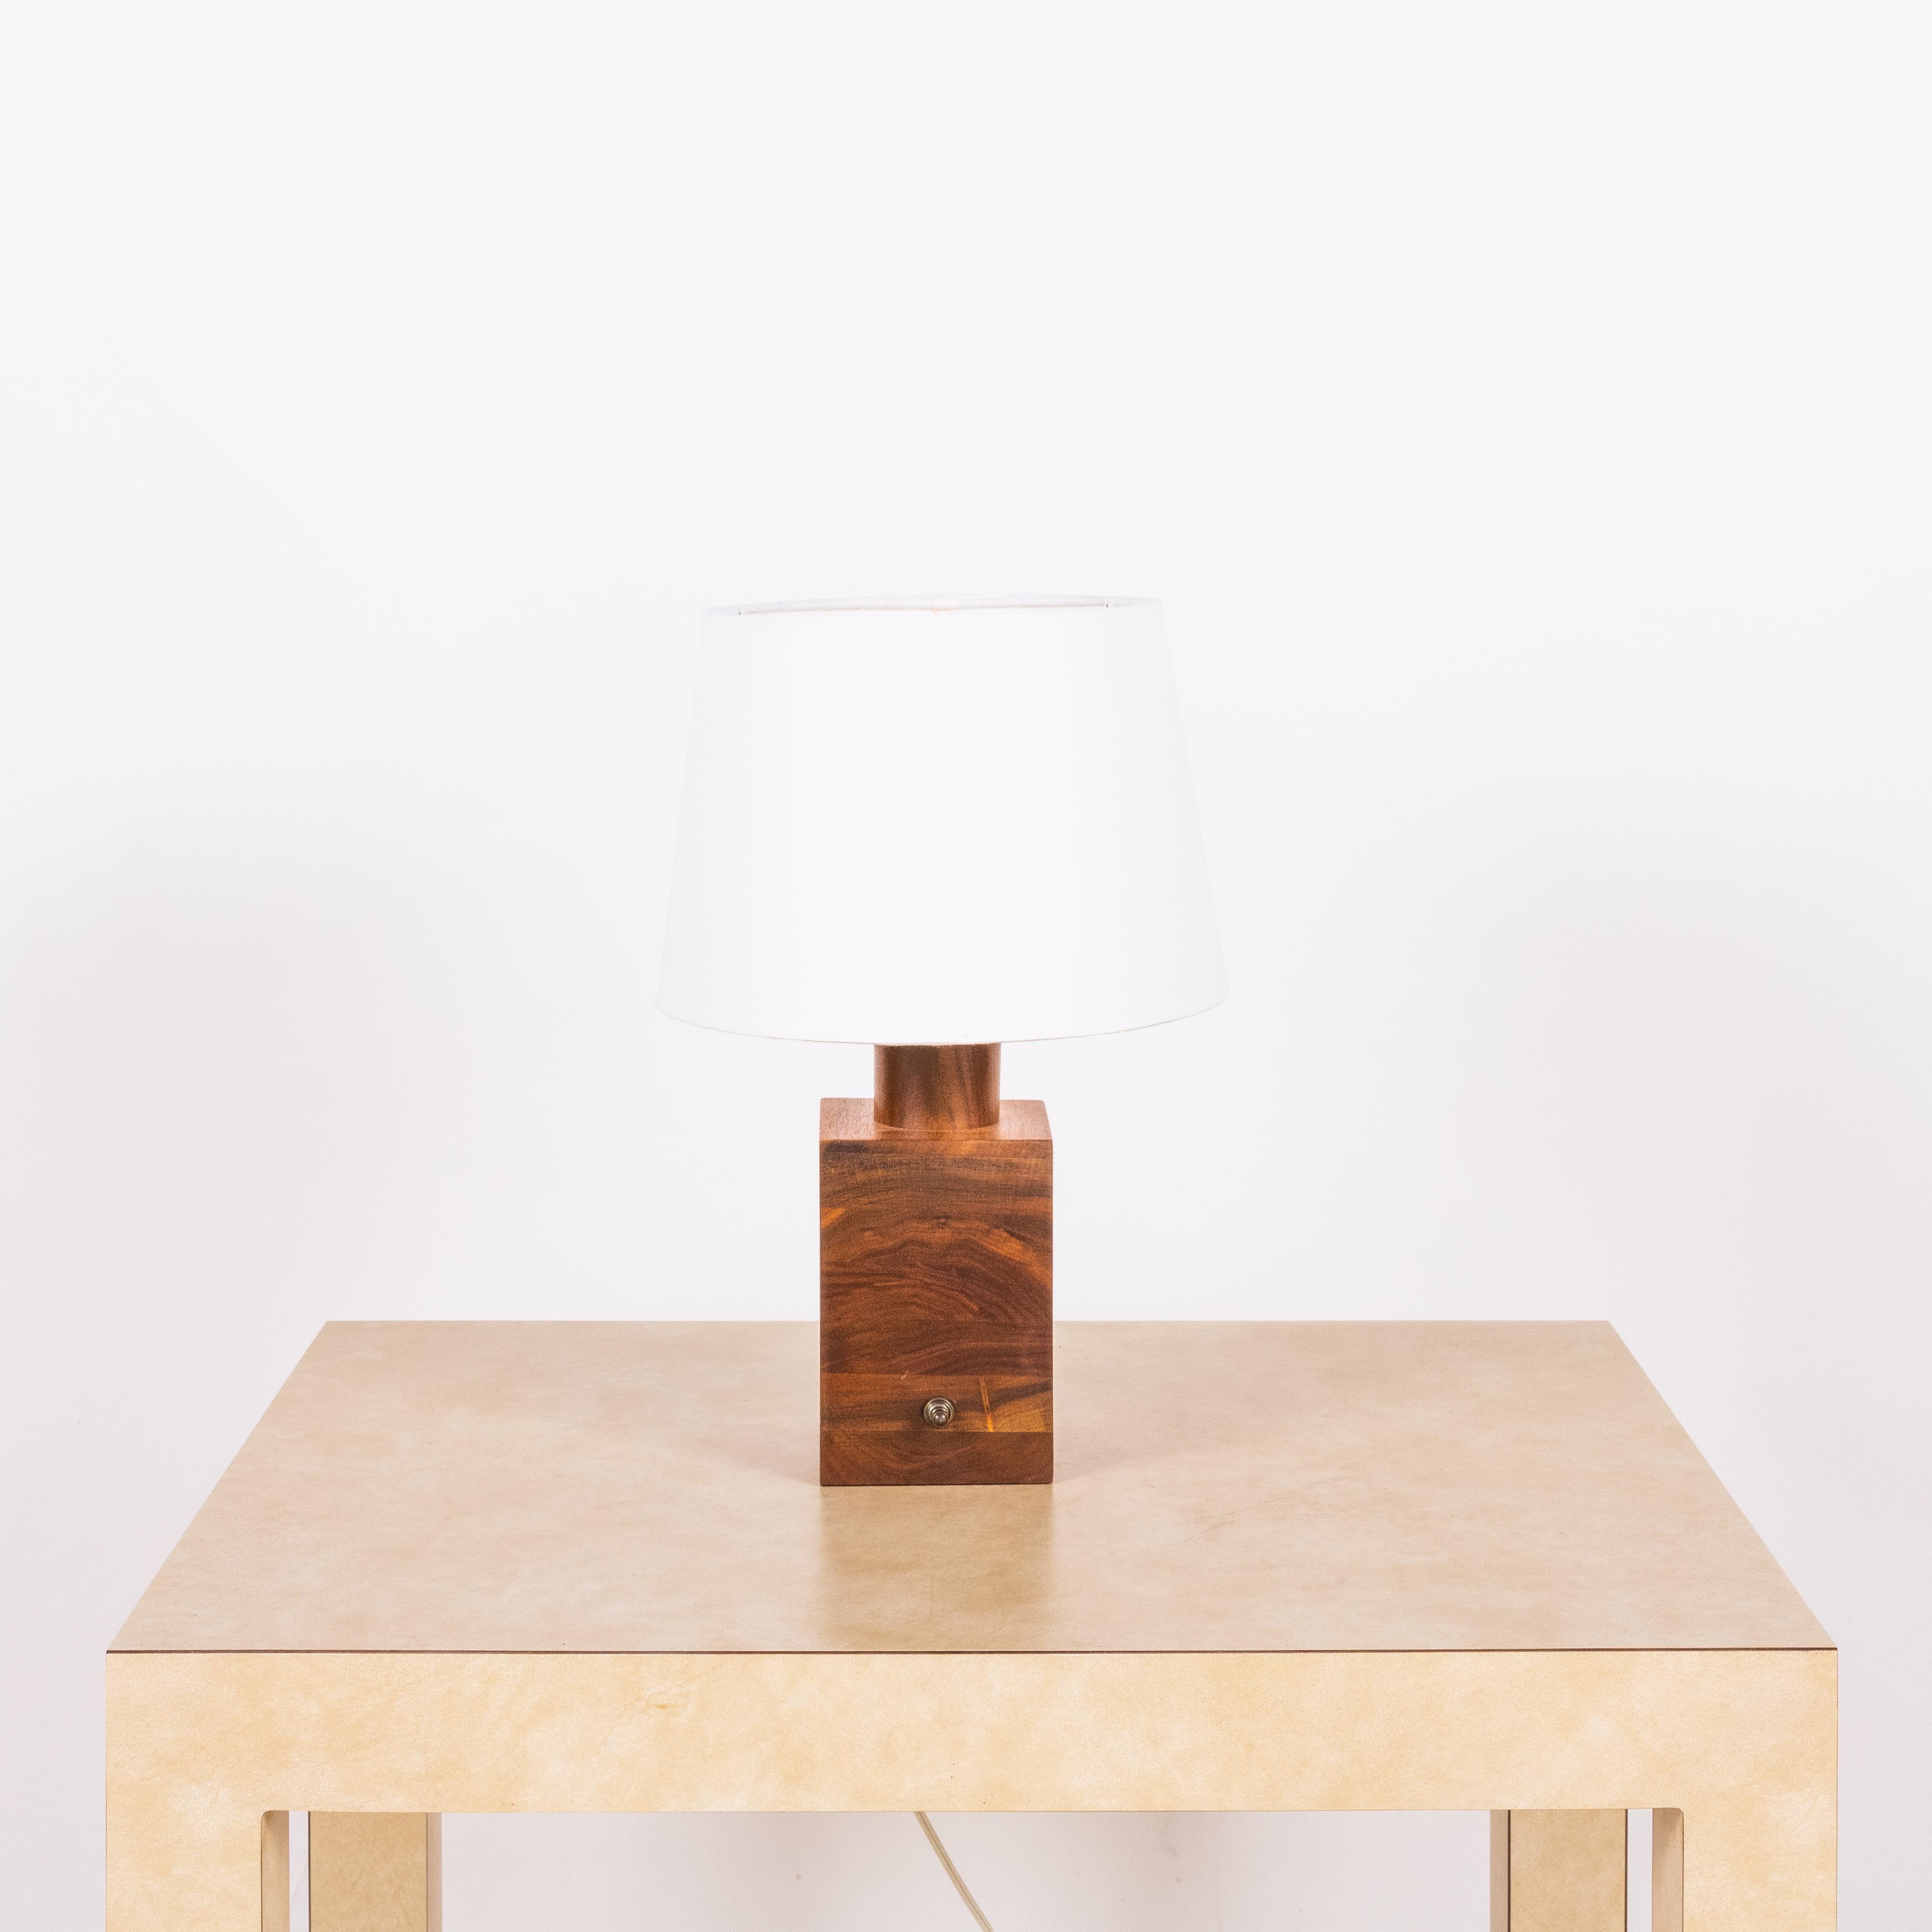 Small minimalist teak lamp with parchment paper shade.

Great as a desk lamp or where a small lamp is needed.

Dimensions listed (10 in. diameter x 16 in. tall) are the overall dimensions of the lamp with the shade) with the teak lamp base 9 1/2